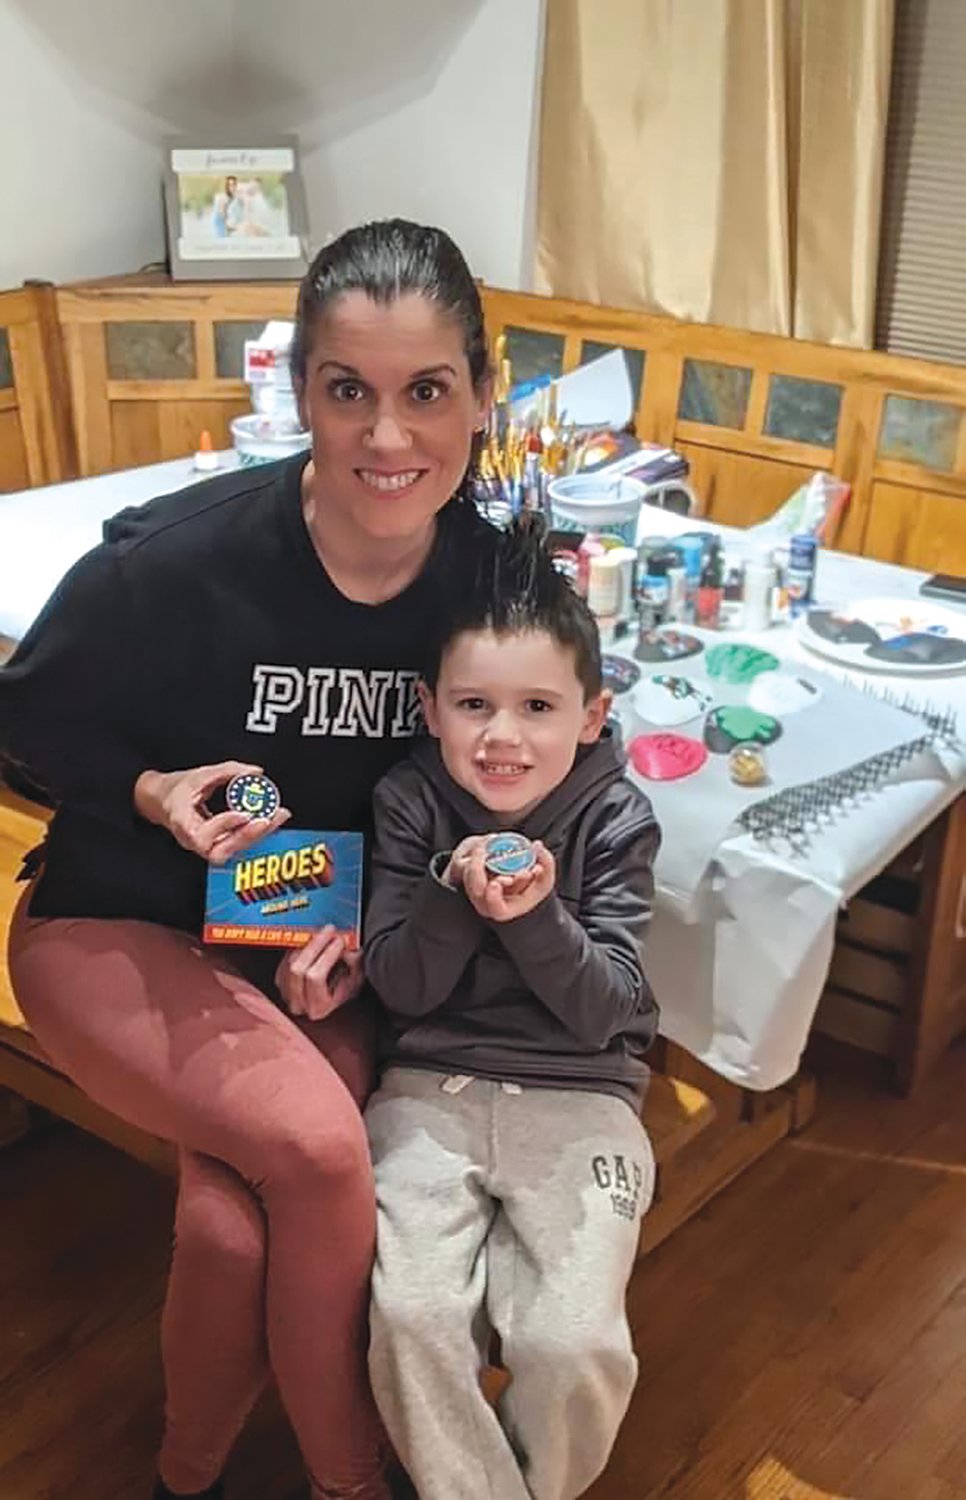 Sheri Scetta Arbige, shown with her son, Jaxon, was inspired to start the Aquidneck Shells effort back in 2020. It has grown exponentially since then.